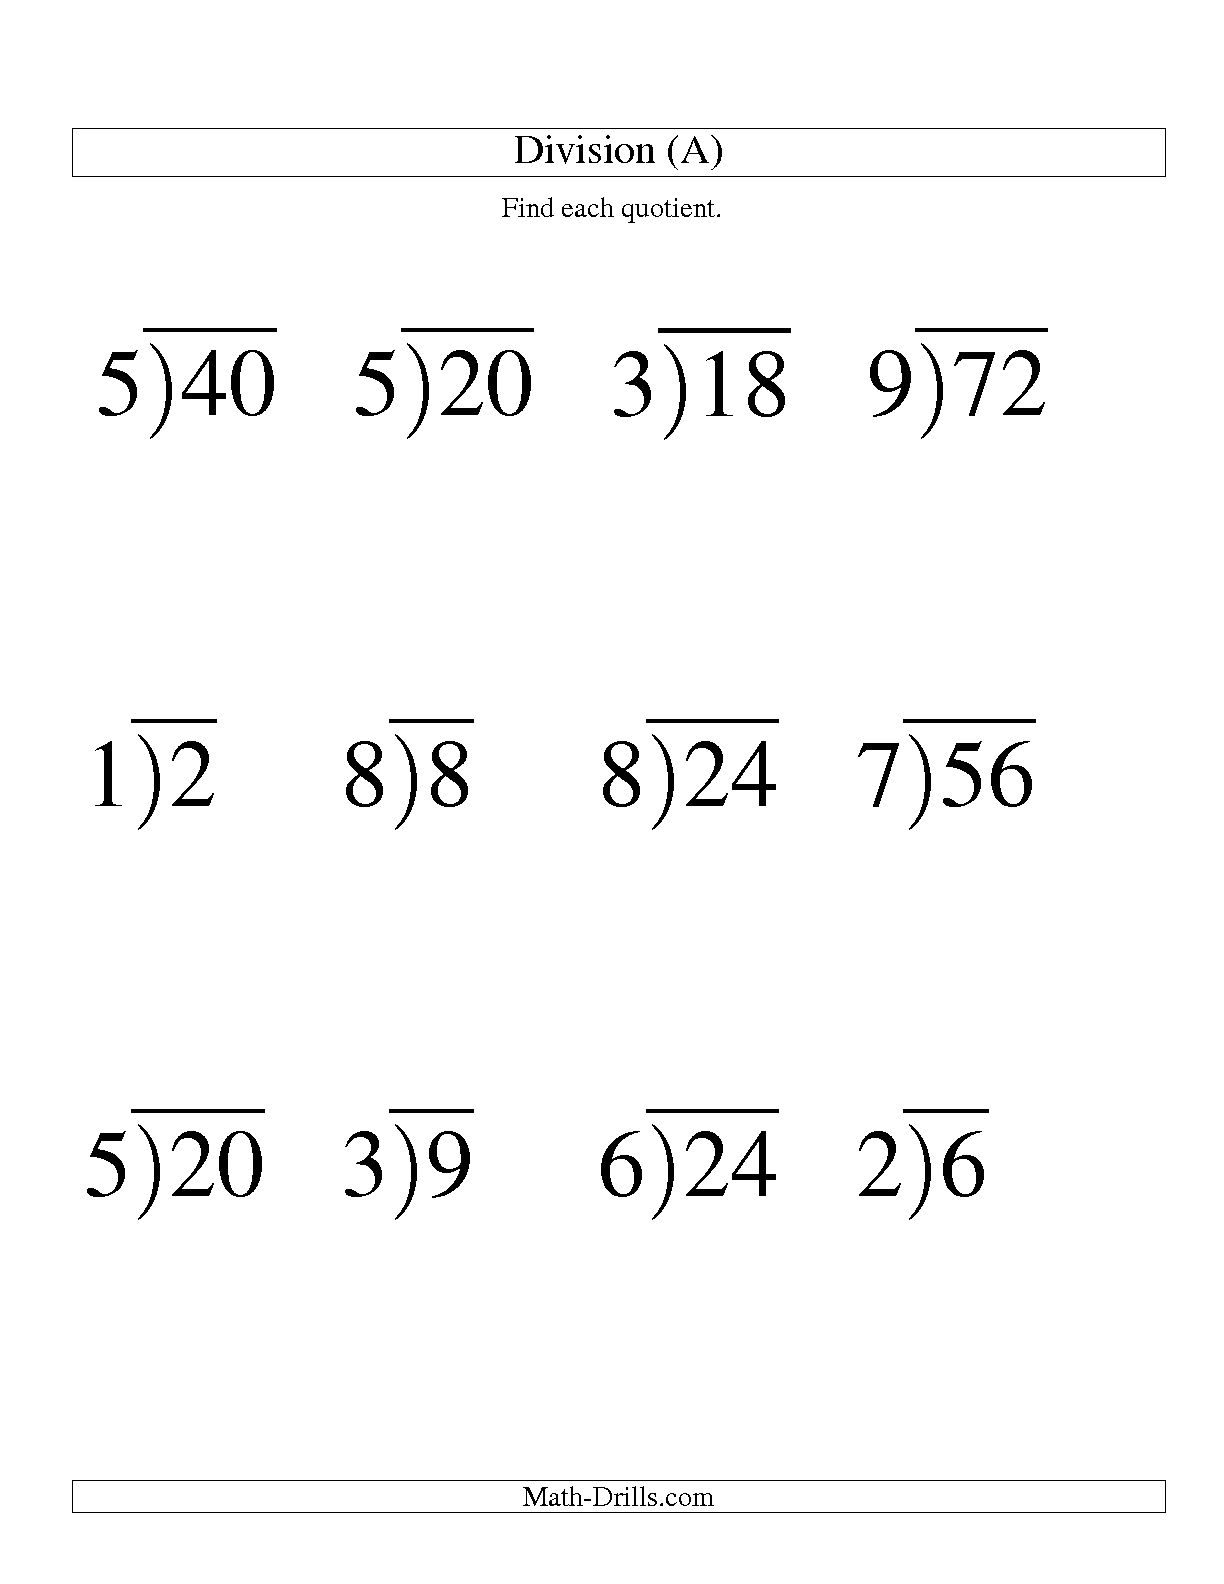 Long Division with Remainders Worksheets